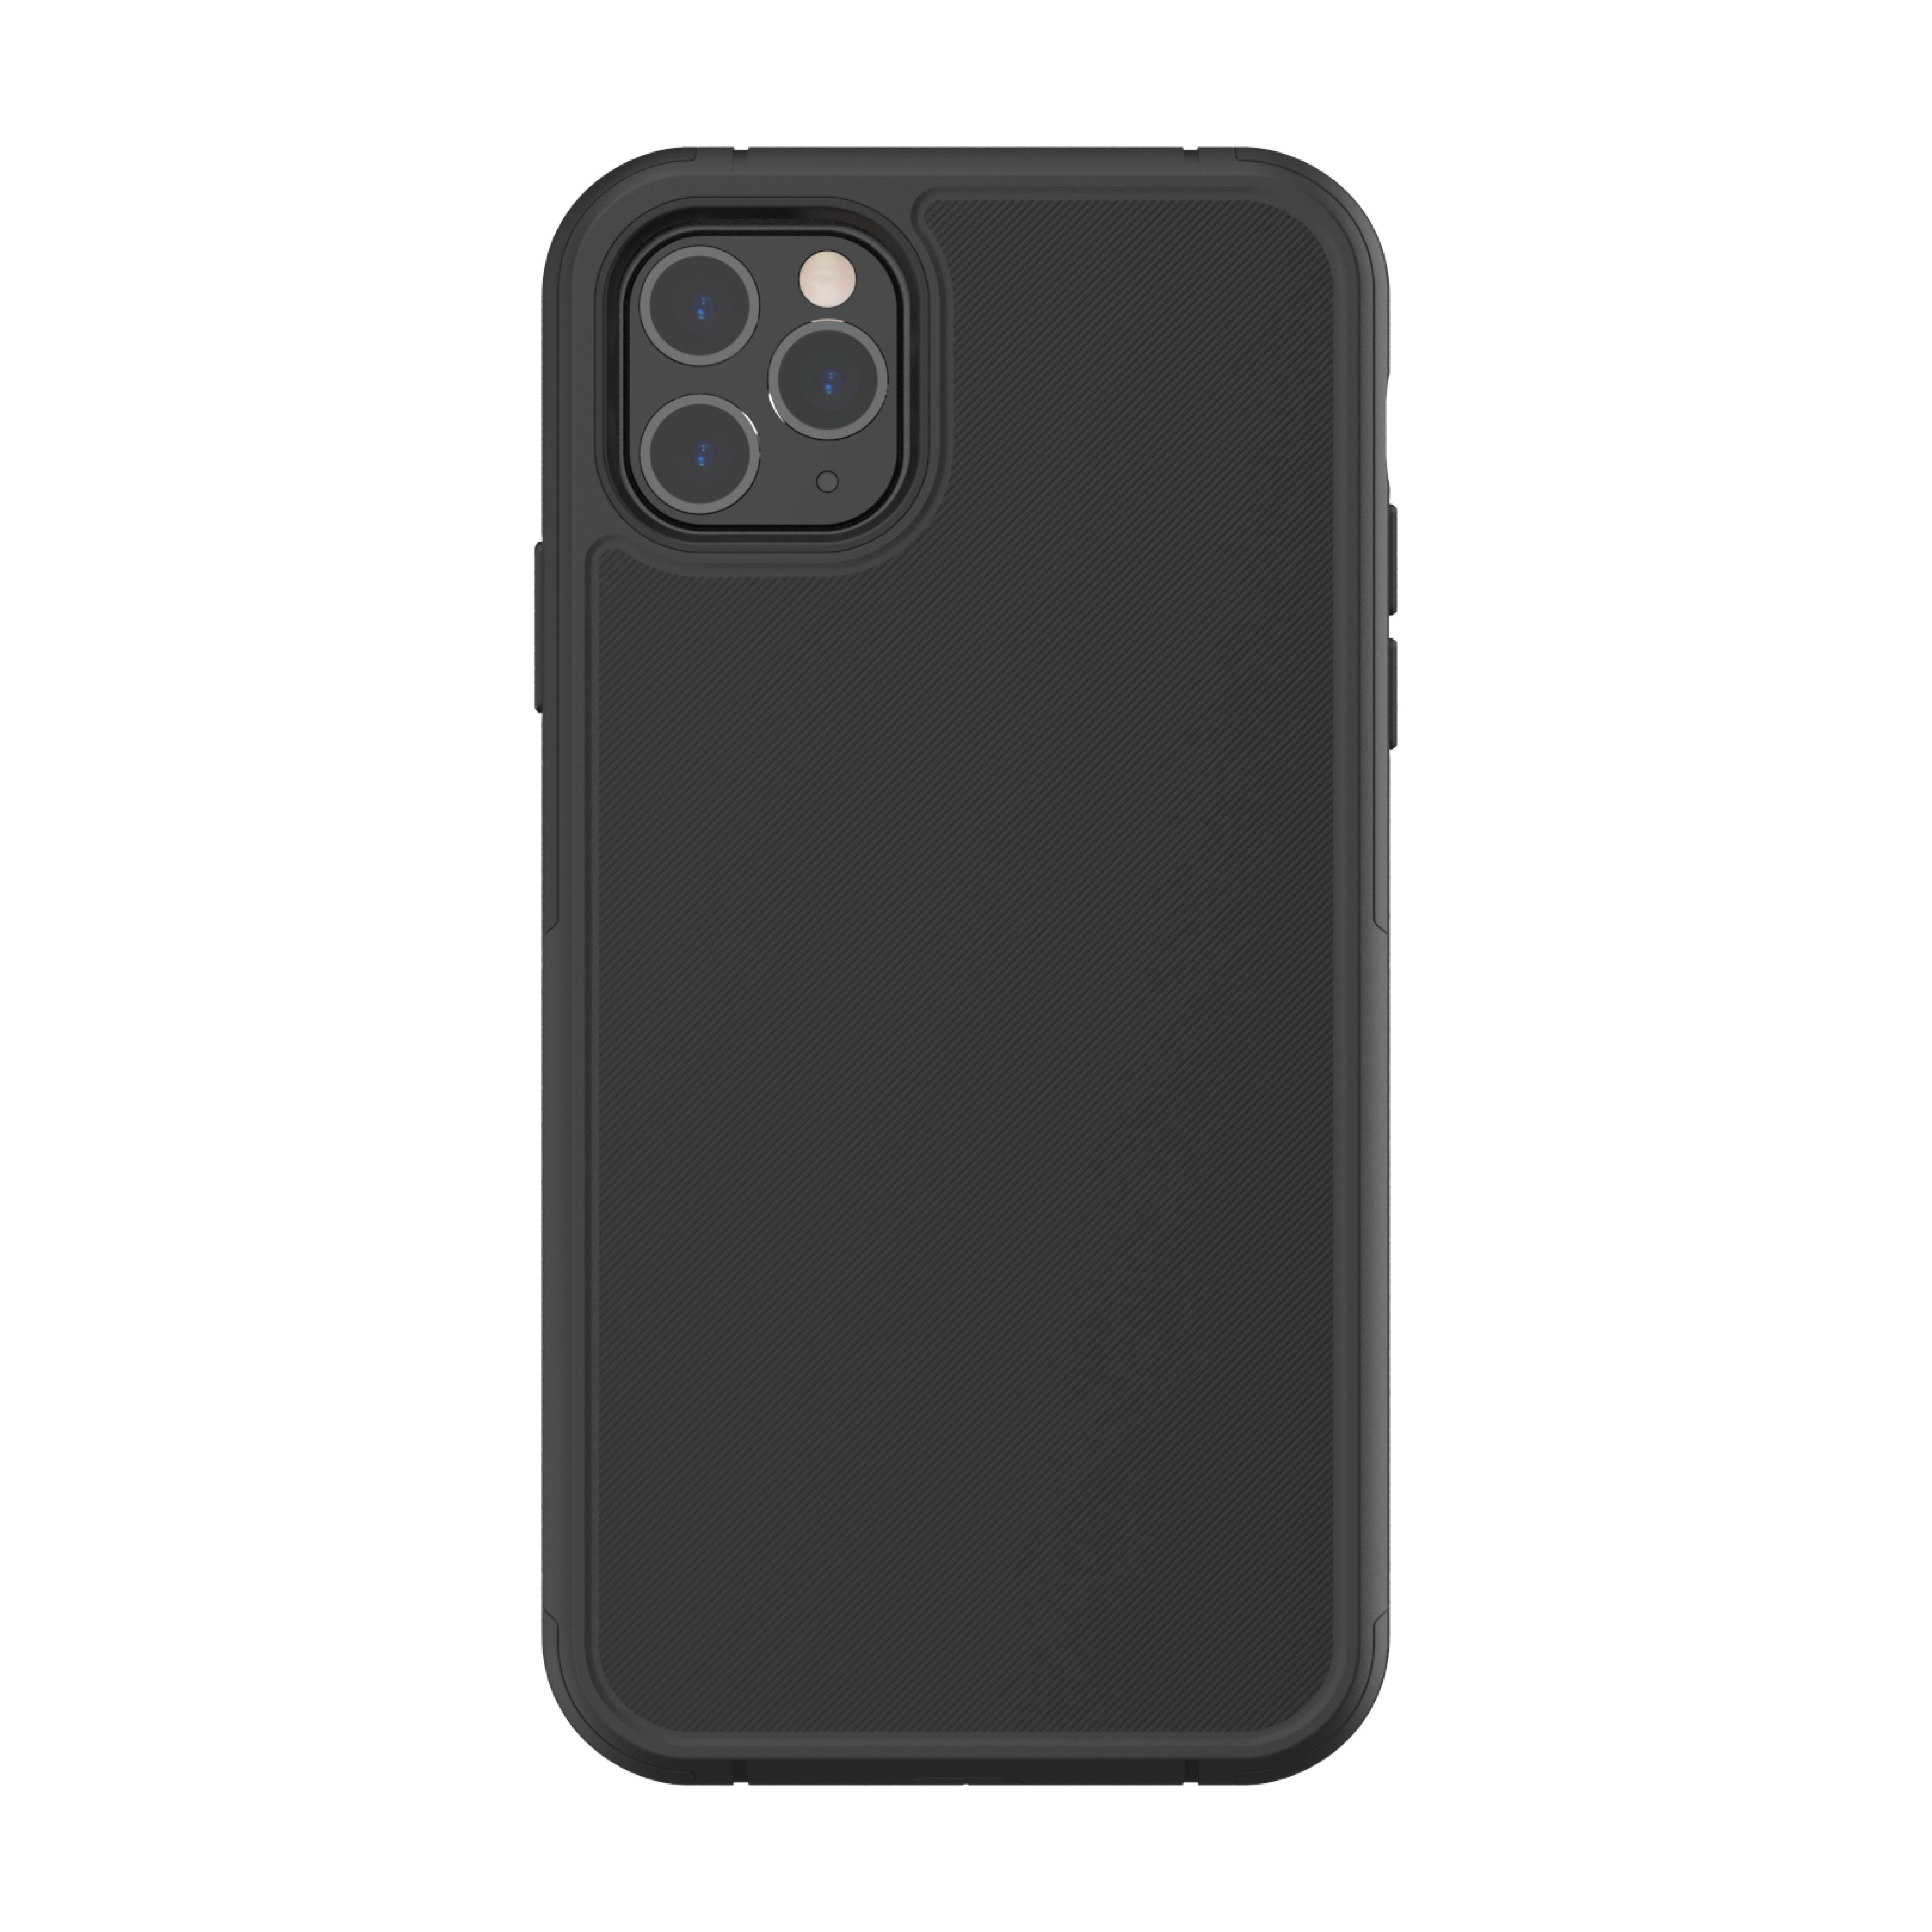 onn. Slim Rugged Phone Case for iPhone 11 Pro Max - Black